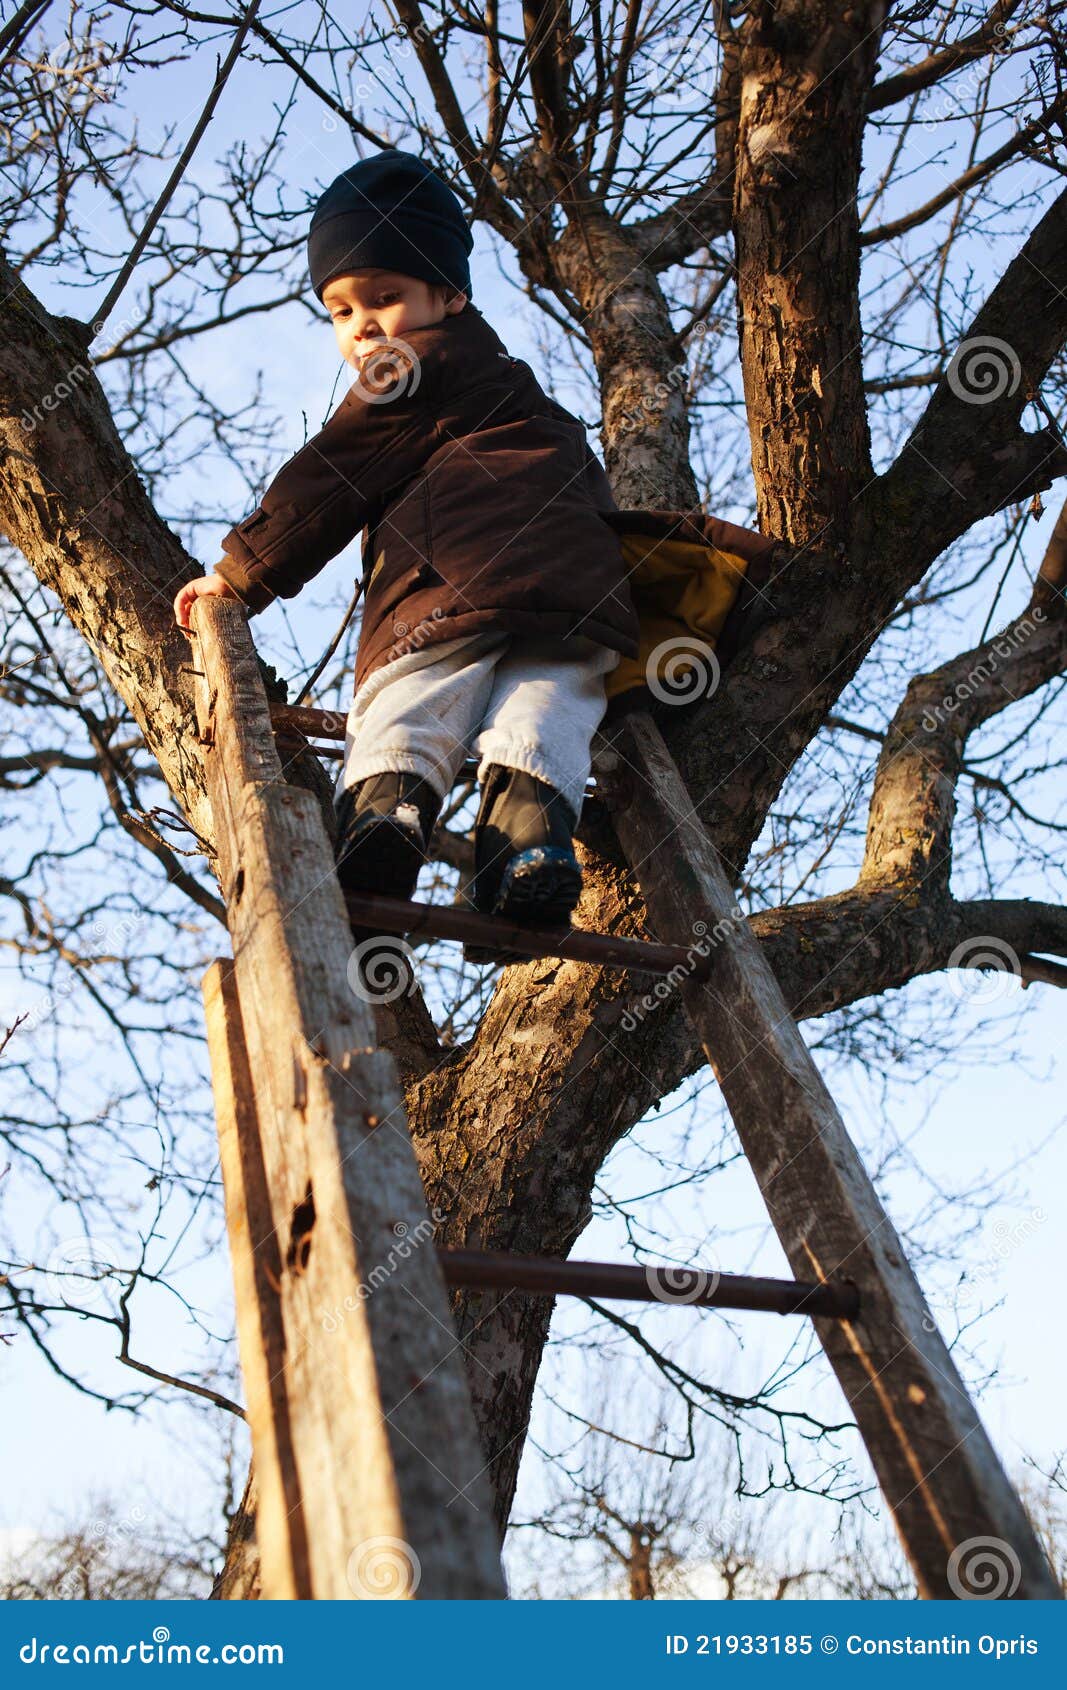 courageous child on ladder